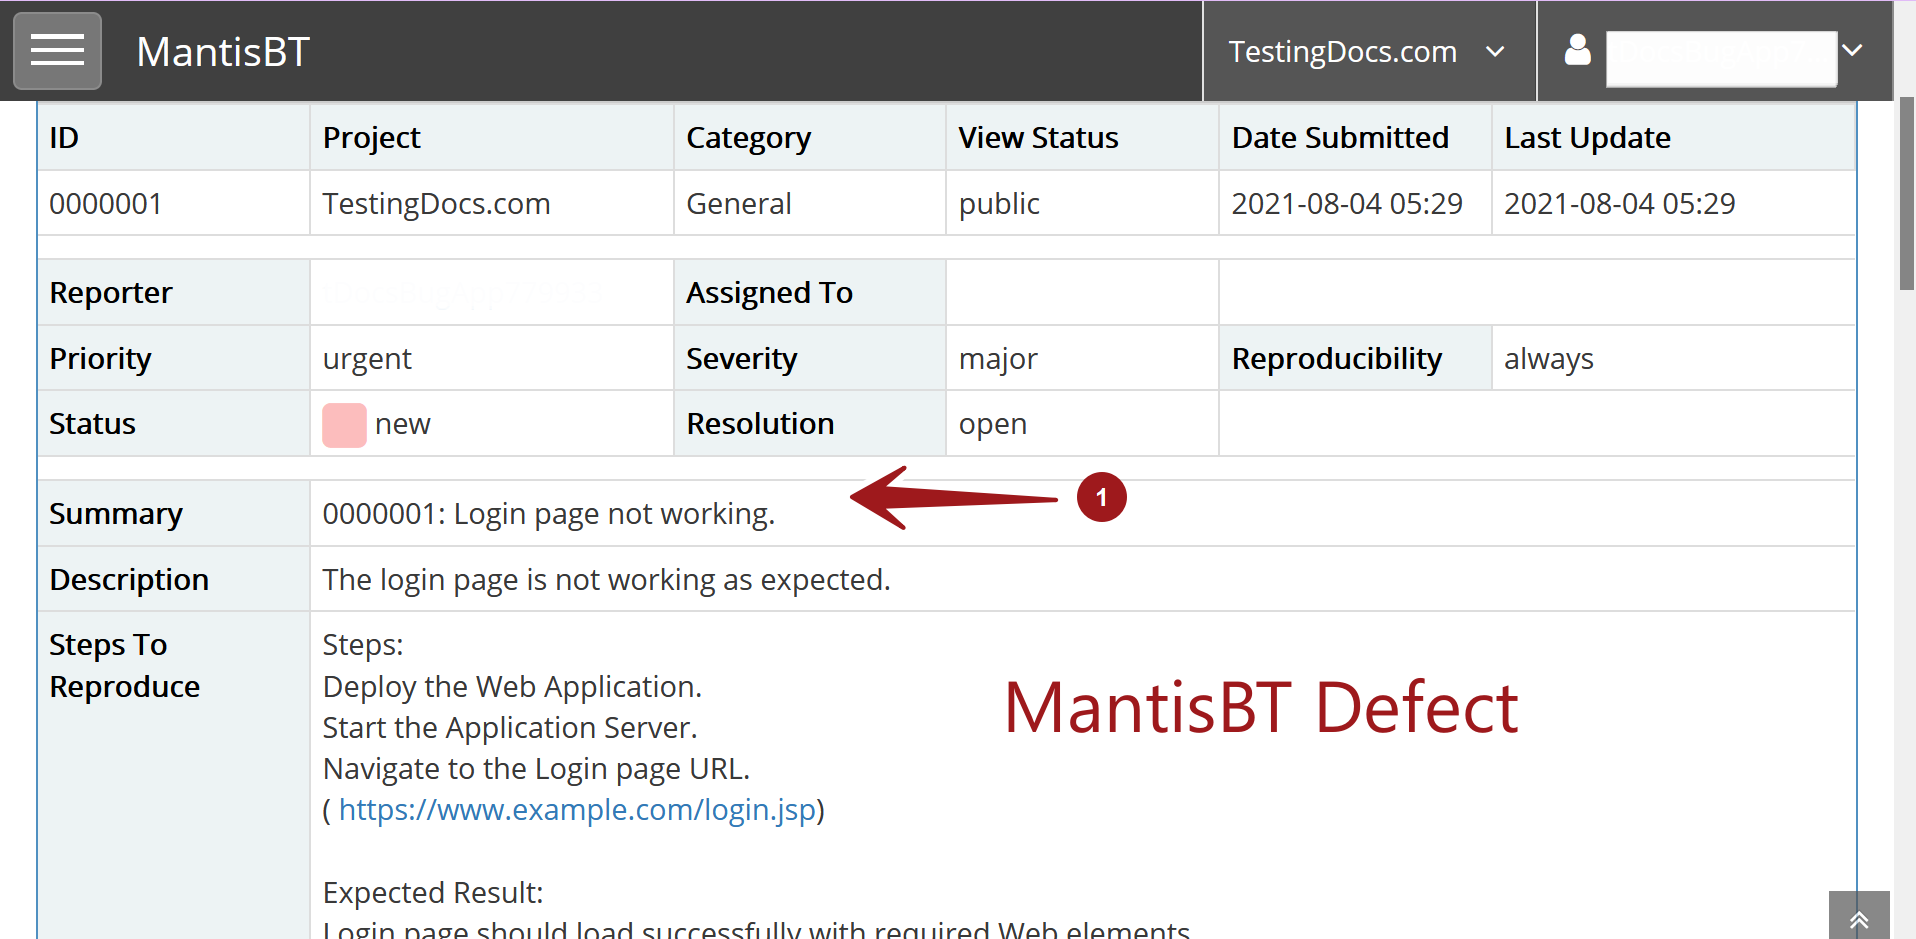 MantisBT Defect View Issue Page